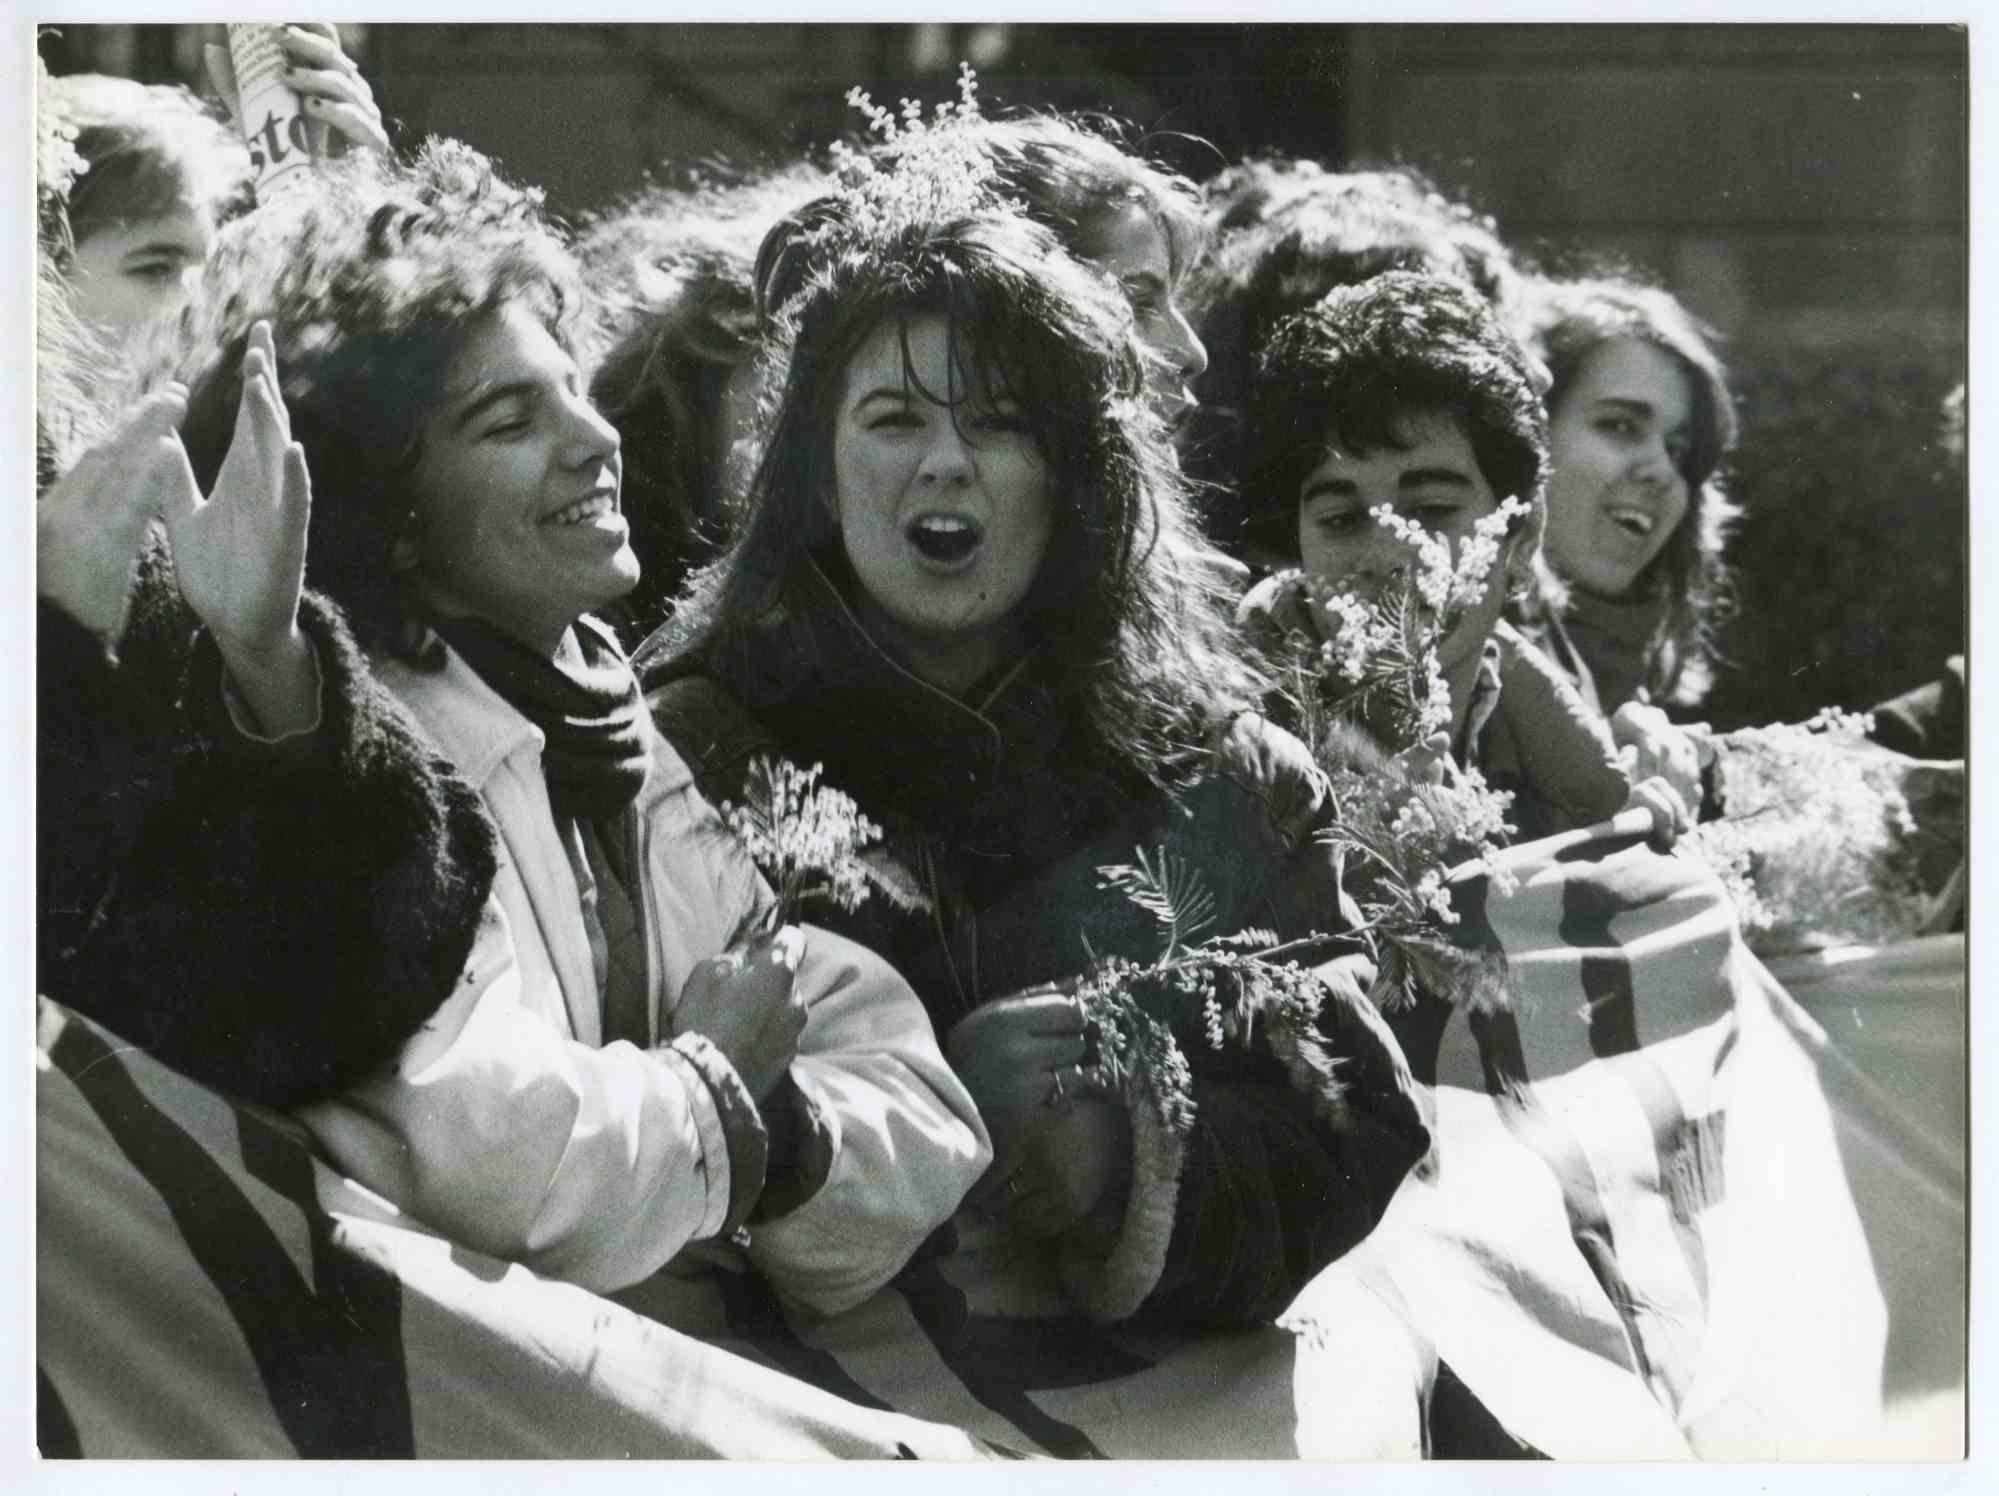 8 of March, Italian students - Photograph of the Feminist Movement - 1988